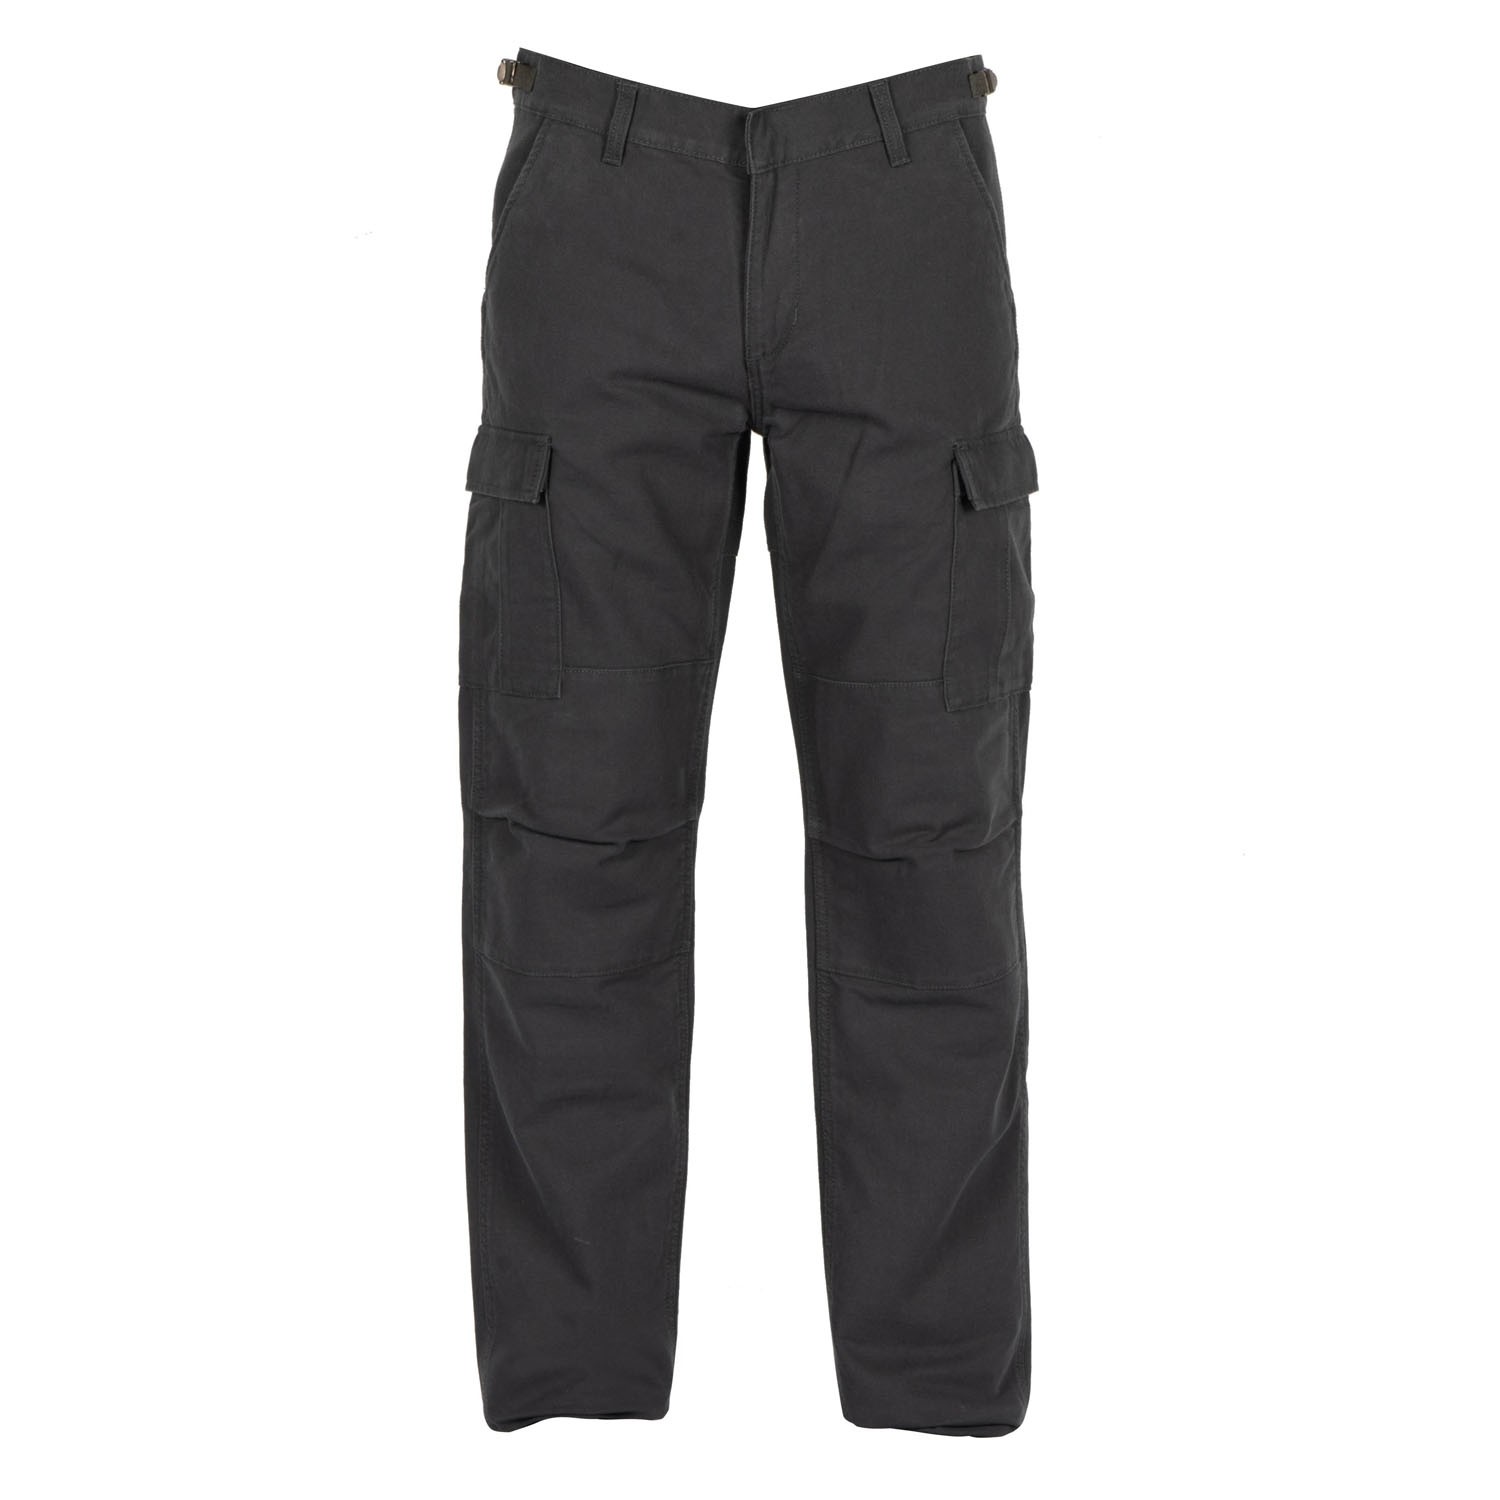 Image of Helstons Cargo Cotton Armalith Grey Pants Size 38 ID 3662136085657